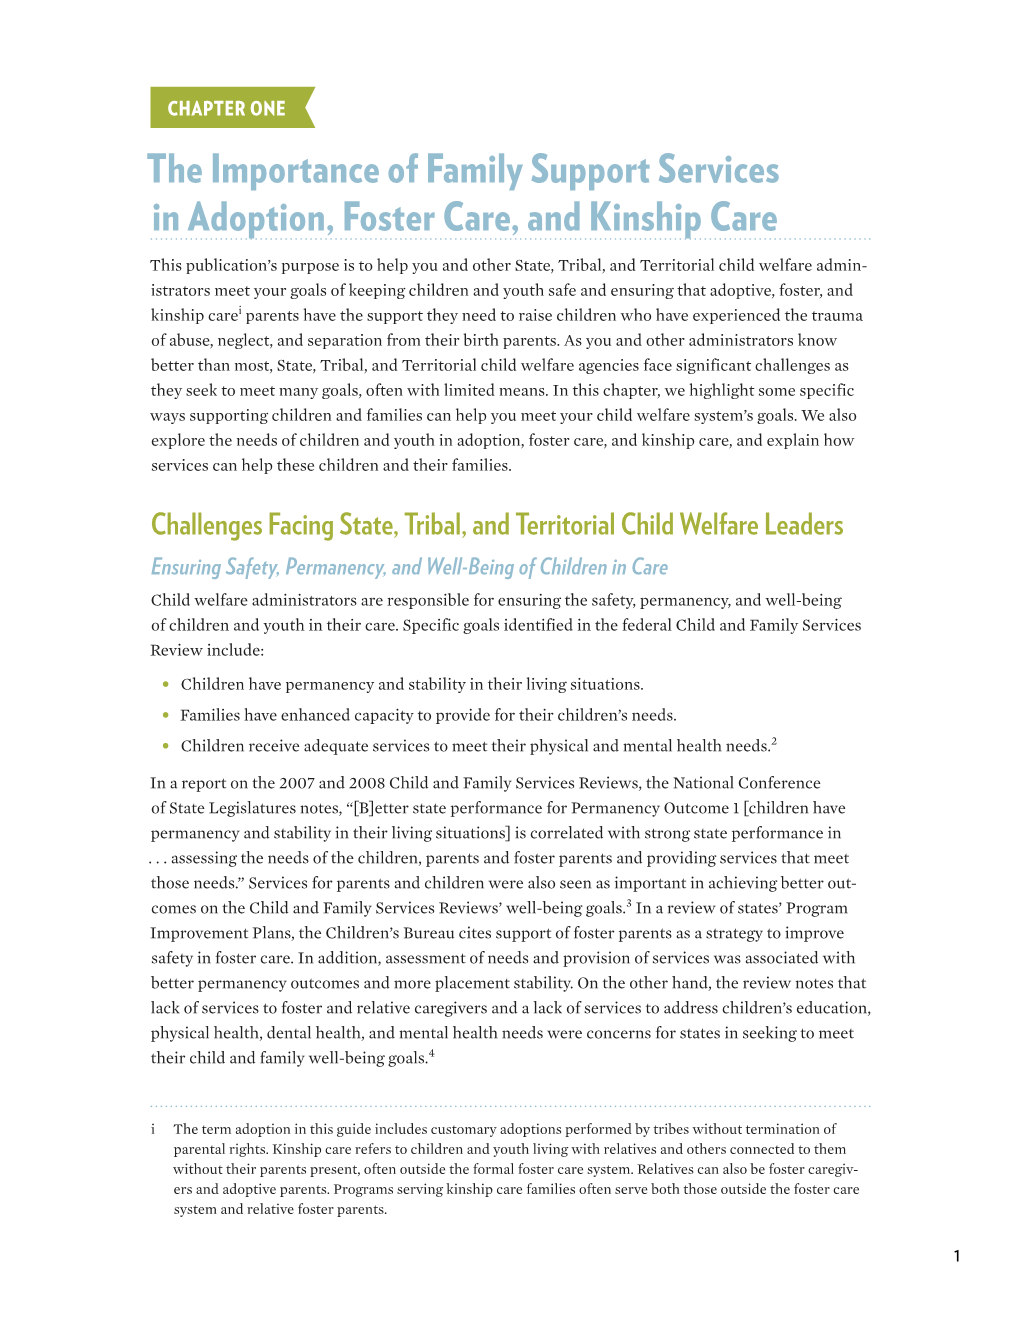 The Importance of Family Support Services in Adoption, Foster Care